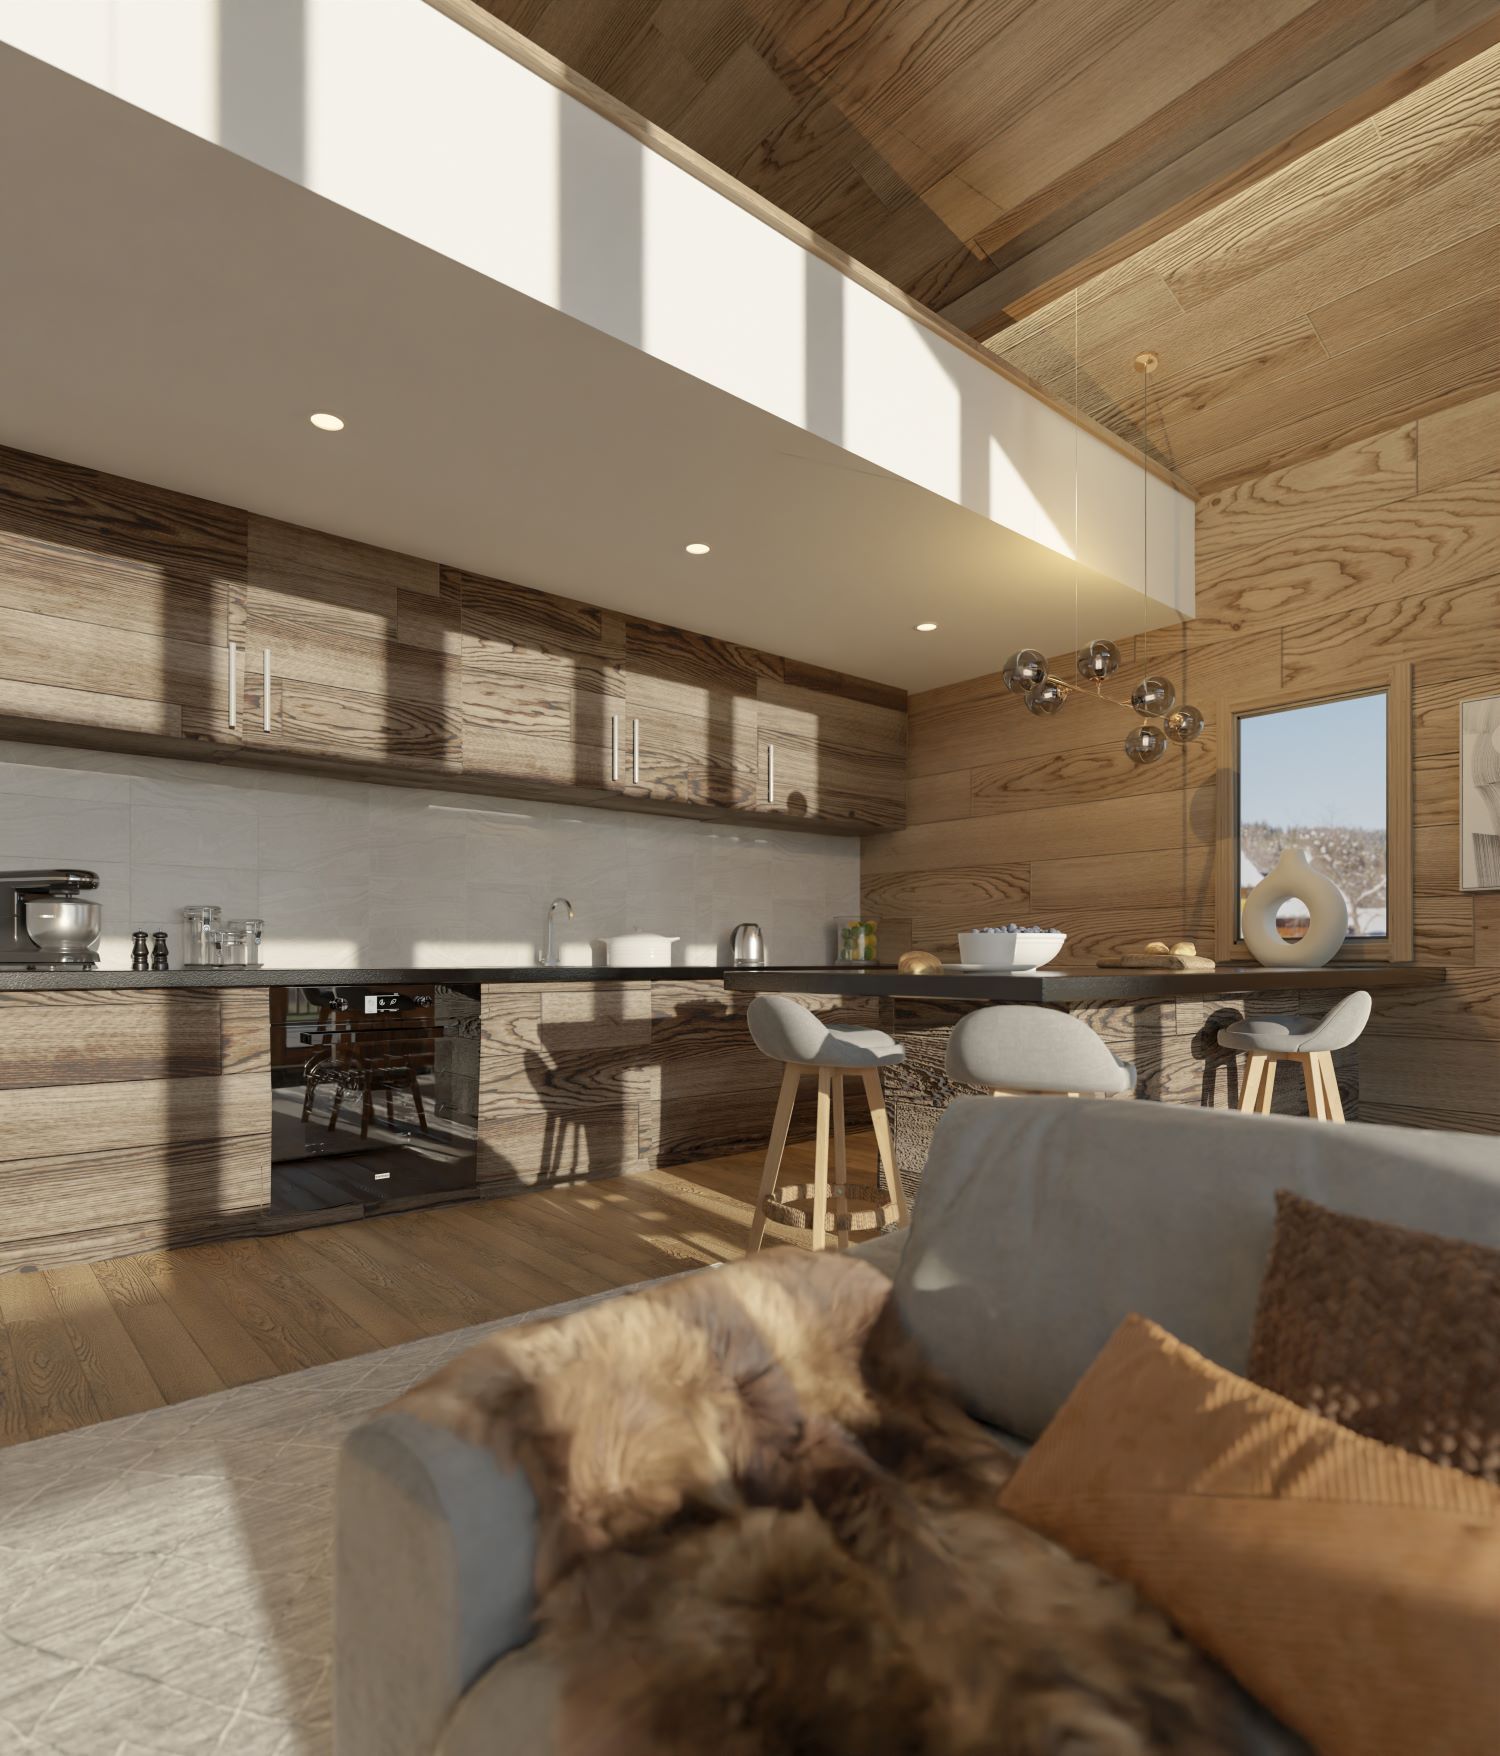 2 bed Apartment For Sale in Three Valleys, French Alps